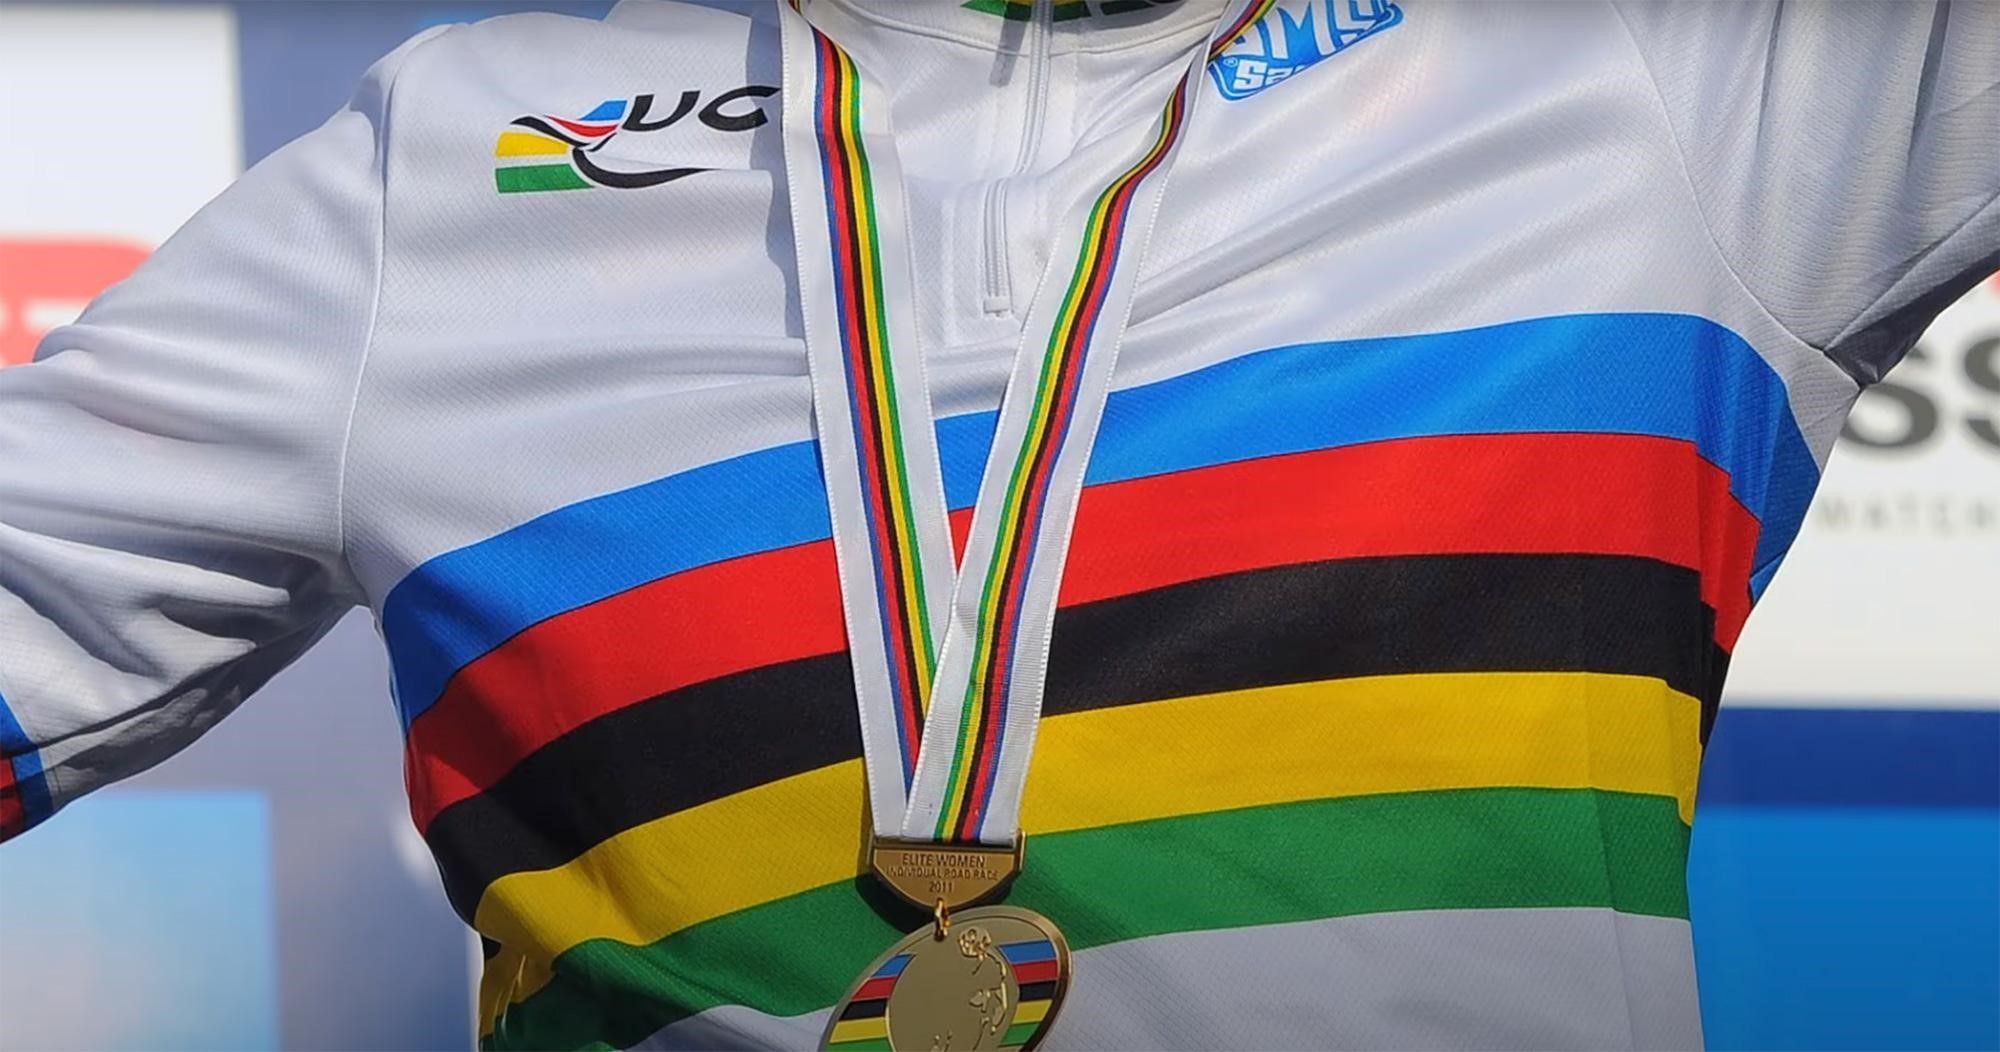 The prestige and honour of the 2023 UCI Road World Championships